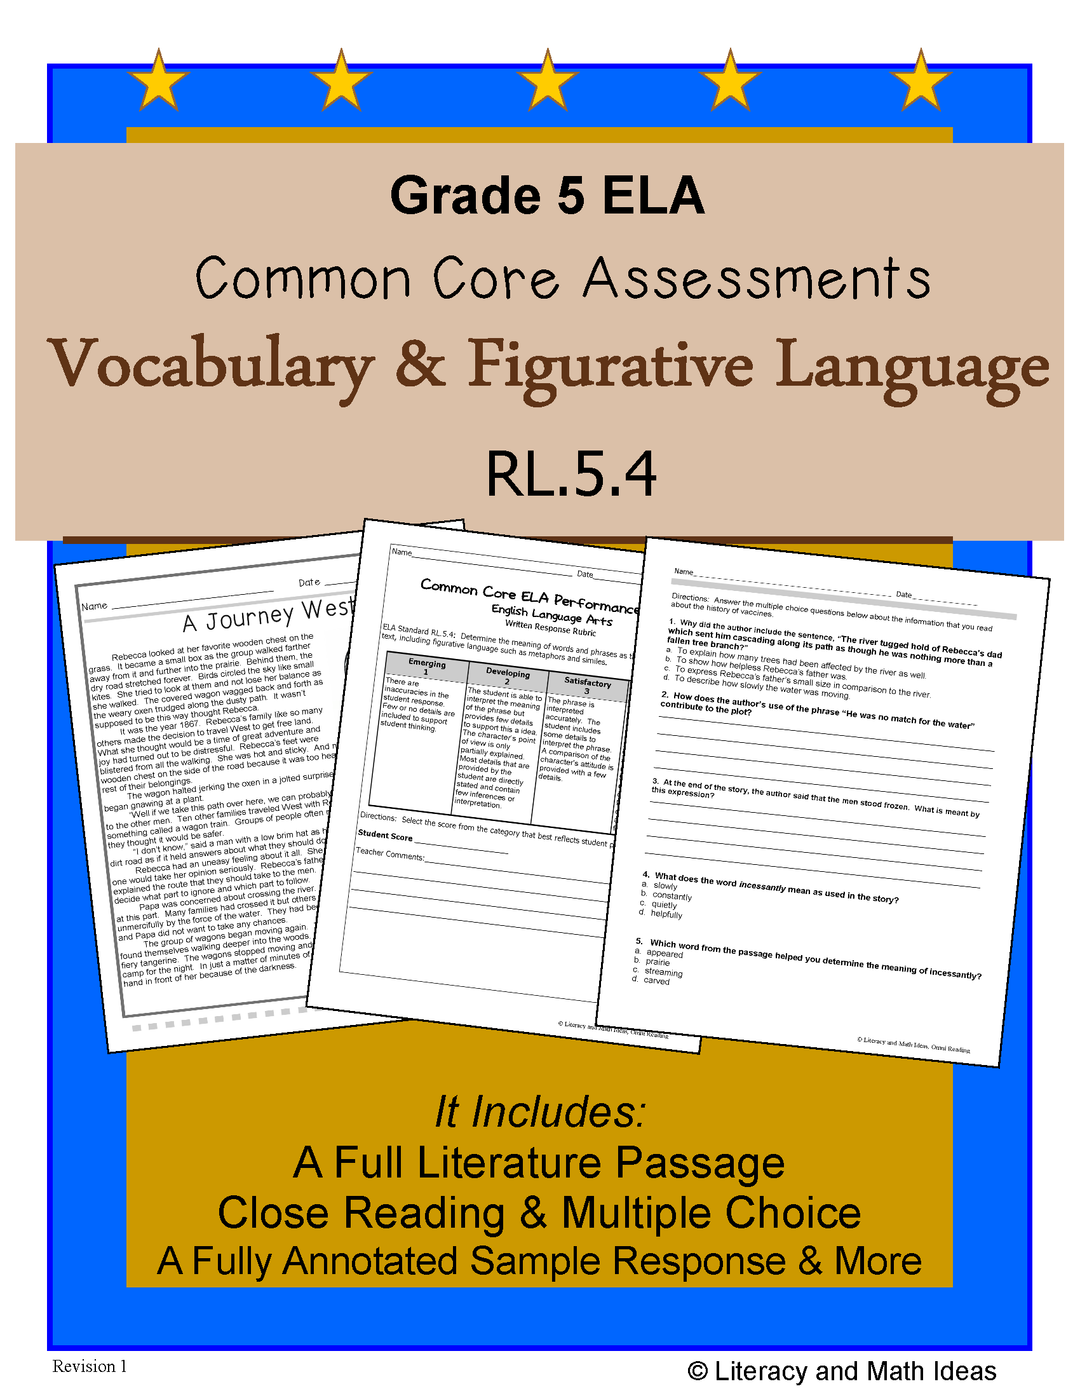 Grade 5 Common Core Assessments: Vocabulary and Figurative Language RL.5.4